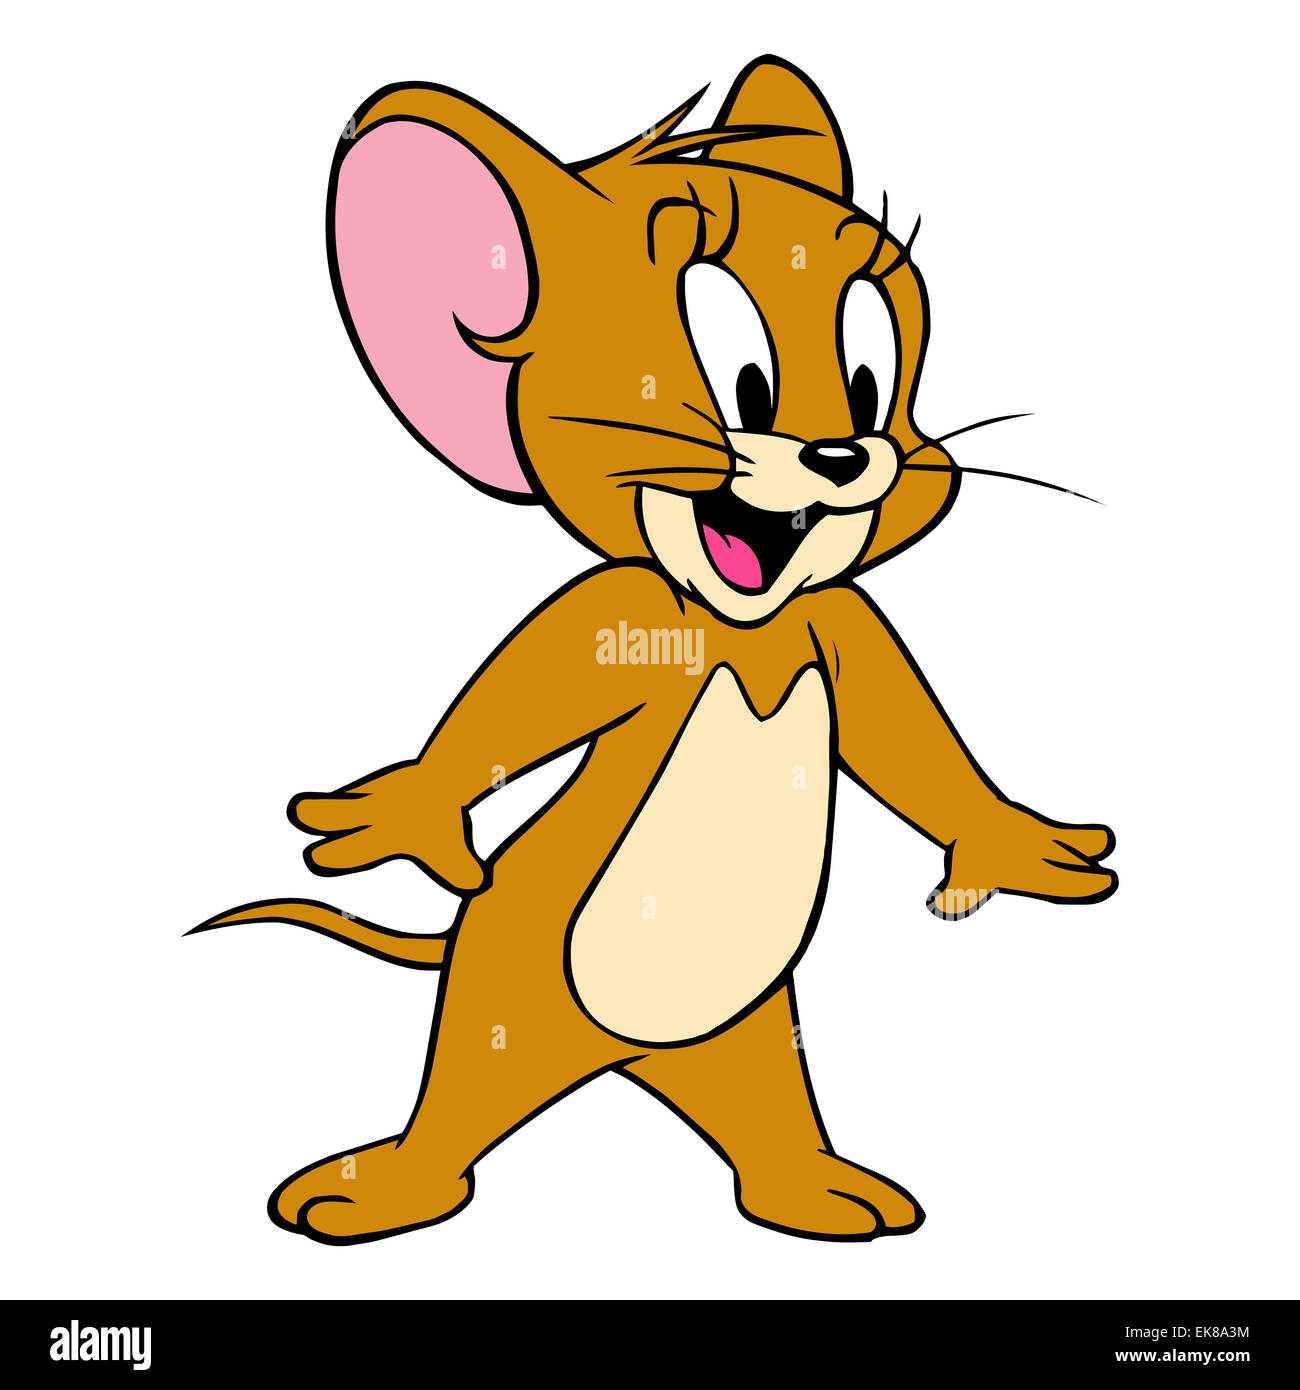 Tom and jerry cartoon Cut Out Stock Images & Pictures - Alamy